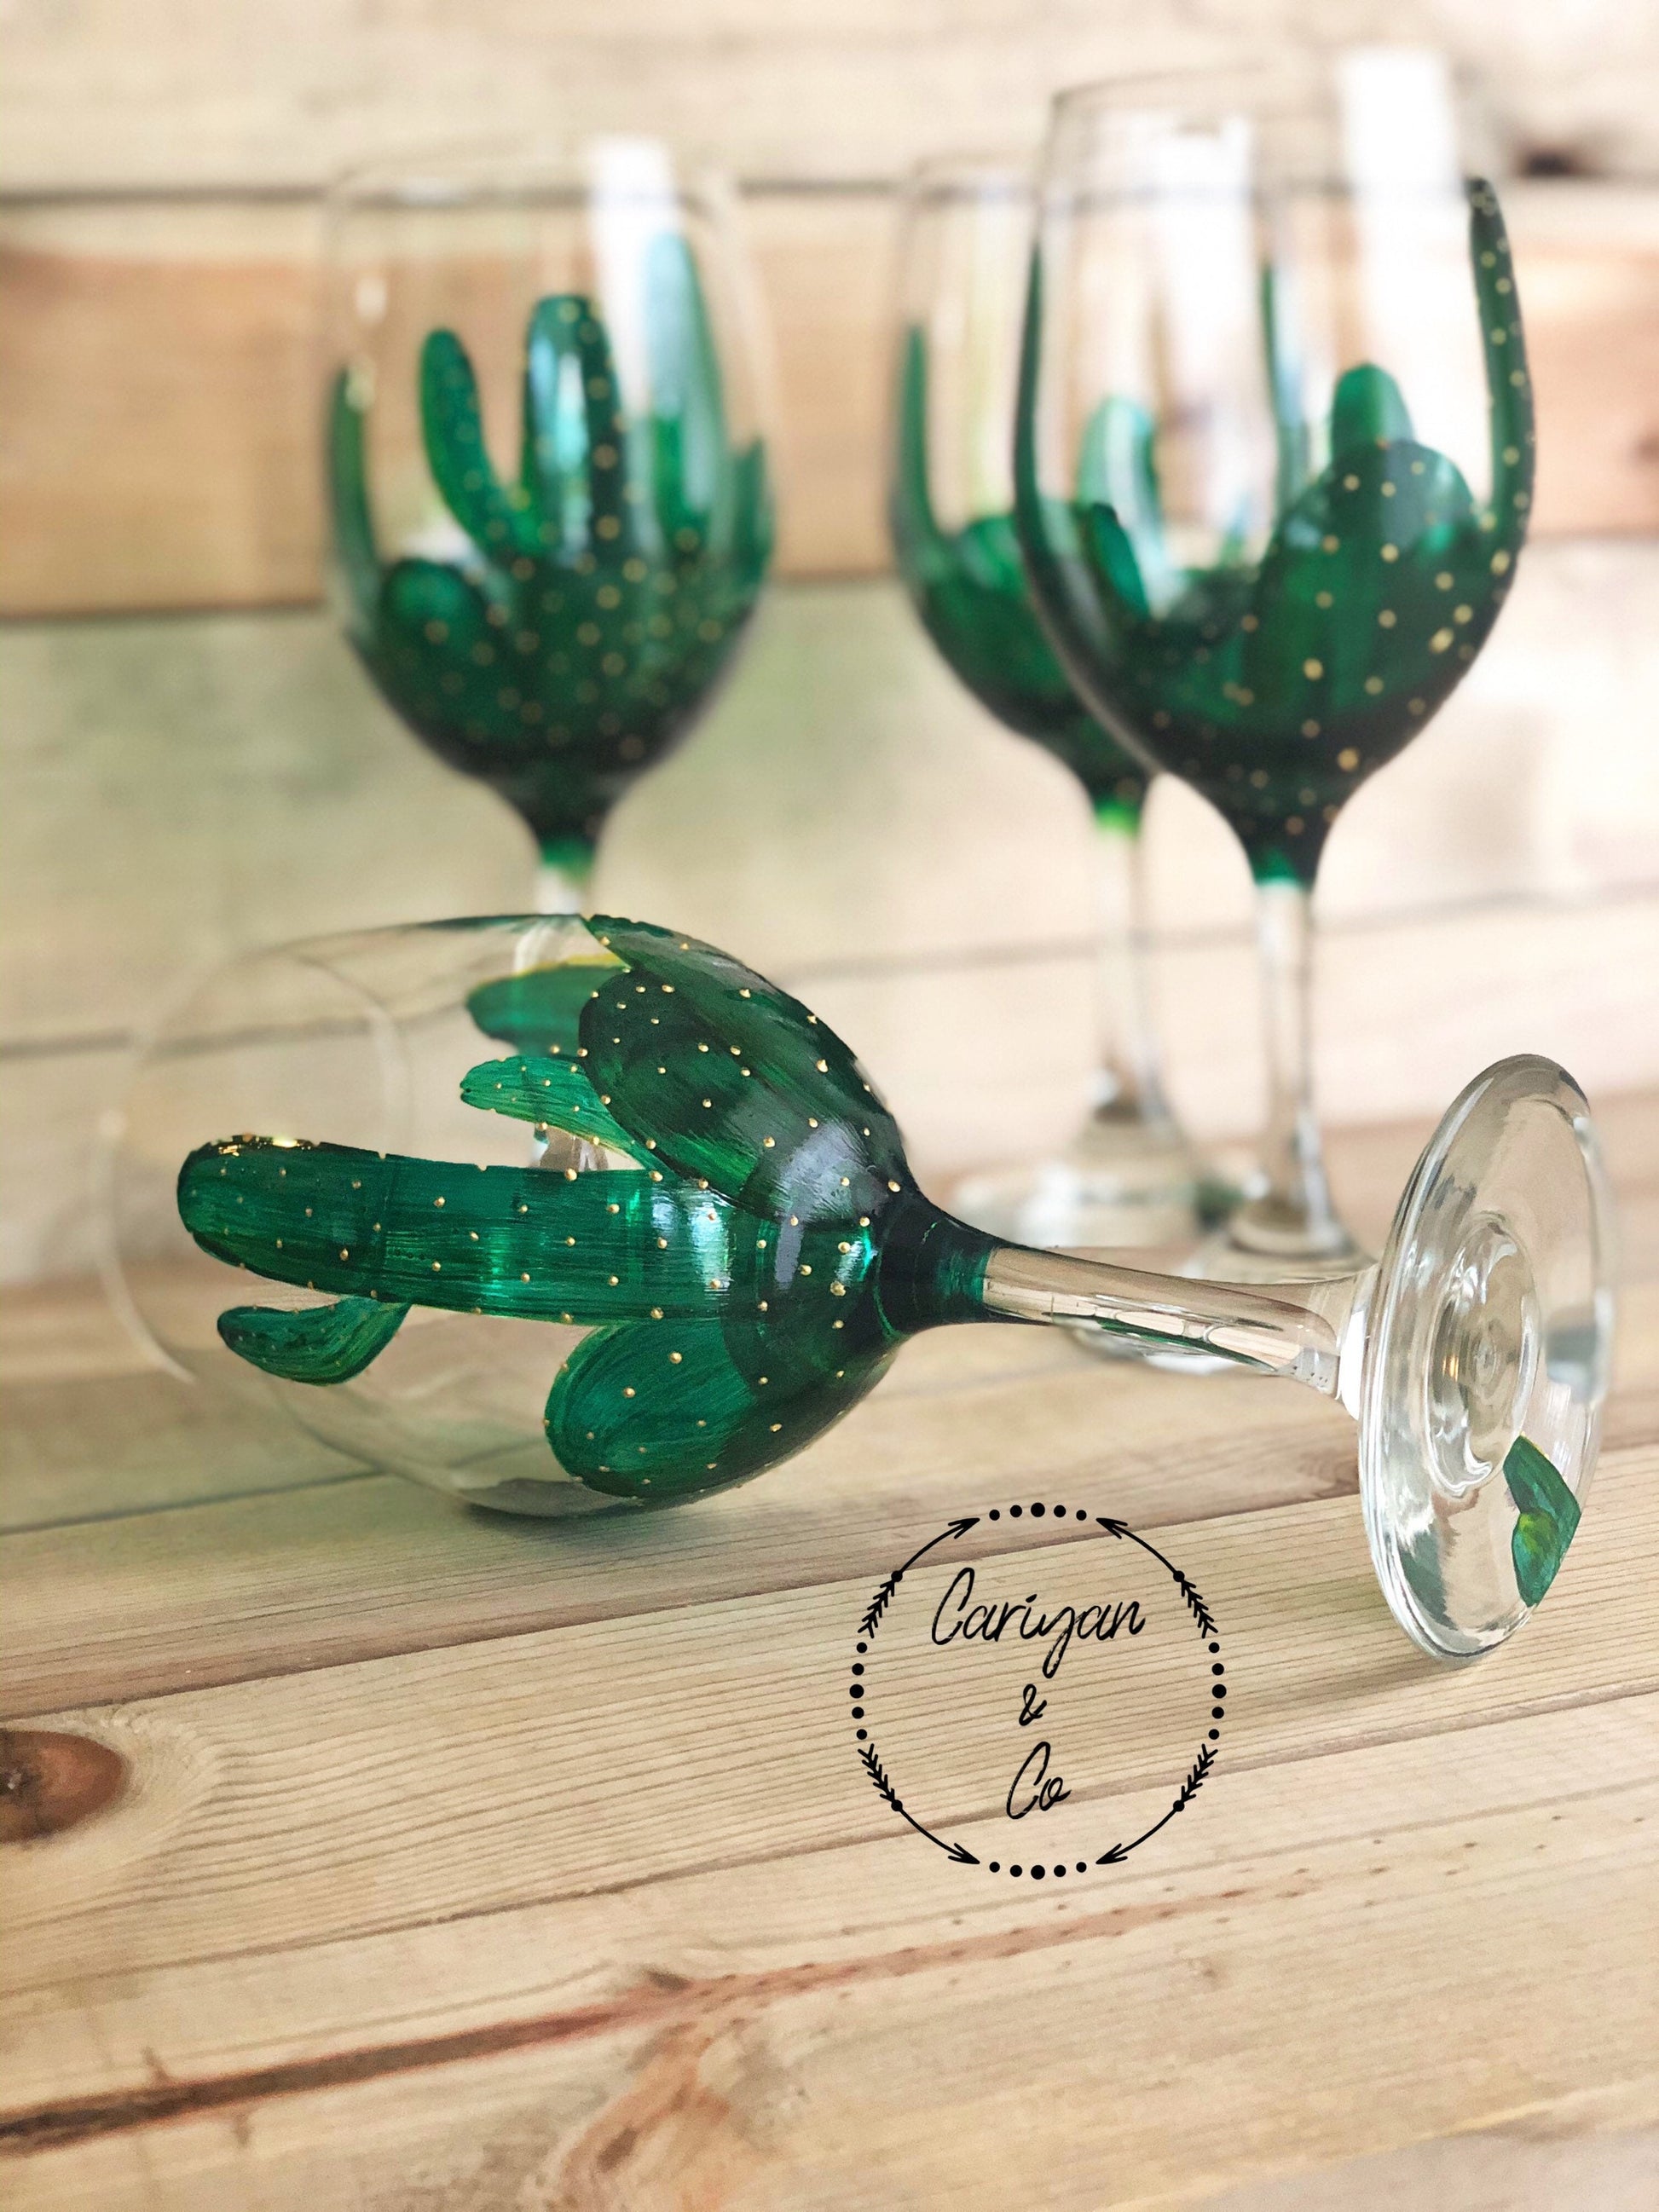 Stemless Wine Glass with Cactus Inside, 16 OZ Large Capacity Unique Wine  Glasses with 3D Cactus Marker for Holiday Birthday Gifts